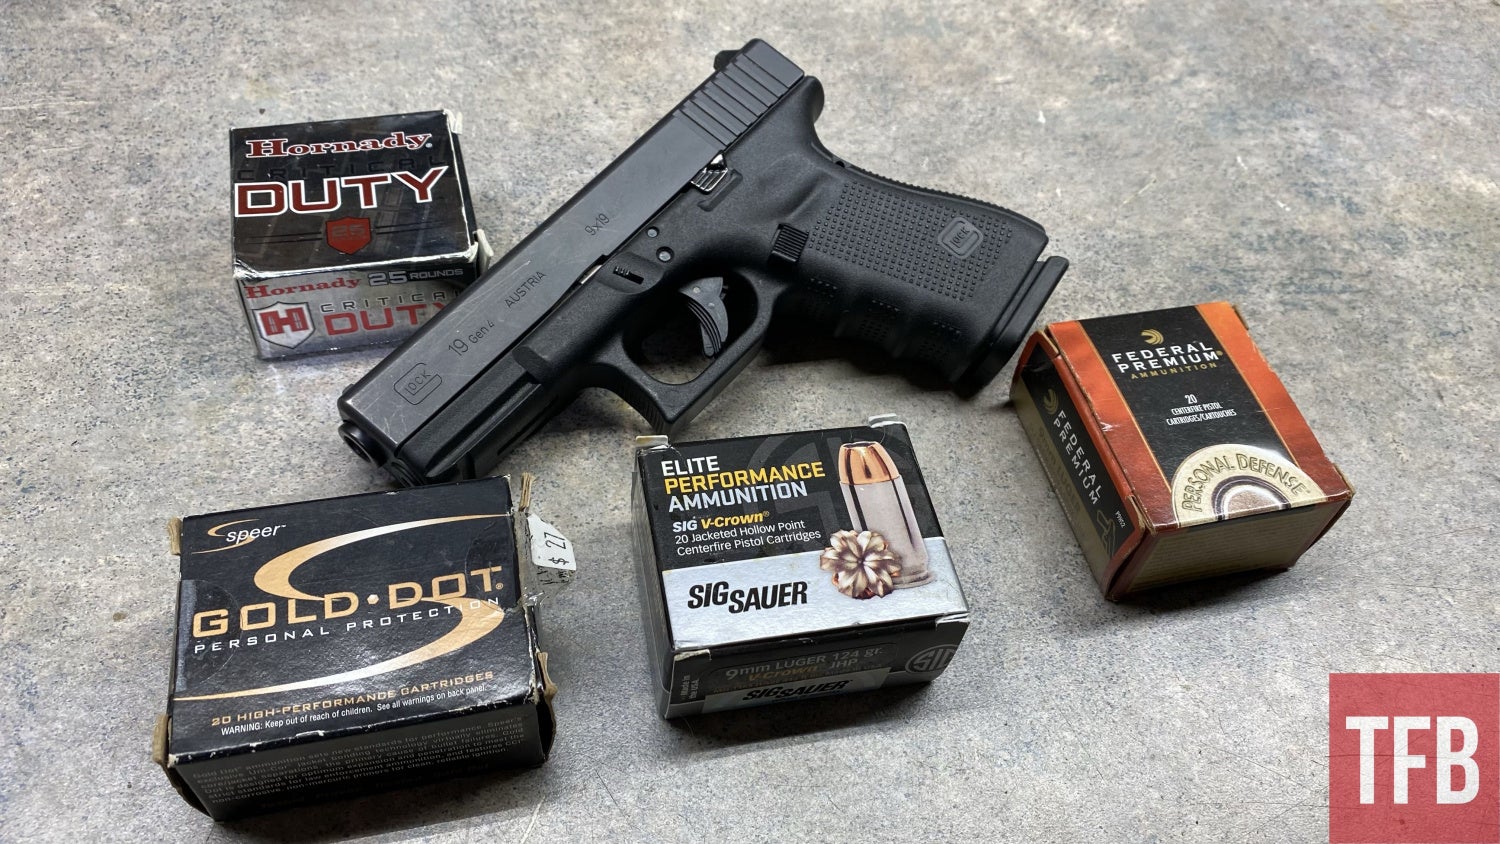 Concealed Carry Corner: Taking A Look At Carry Ammo